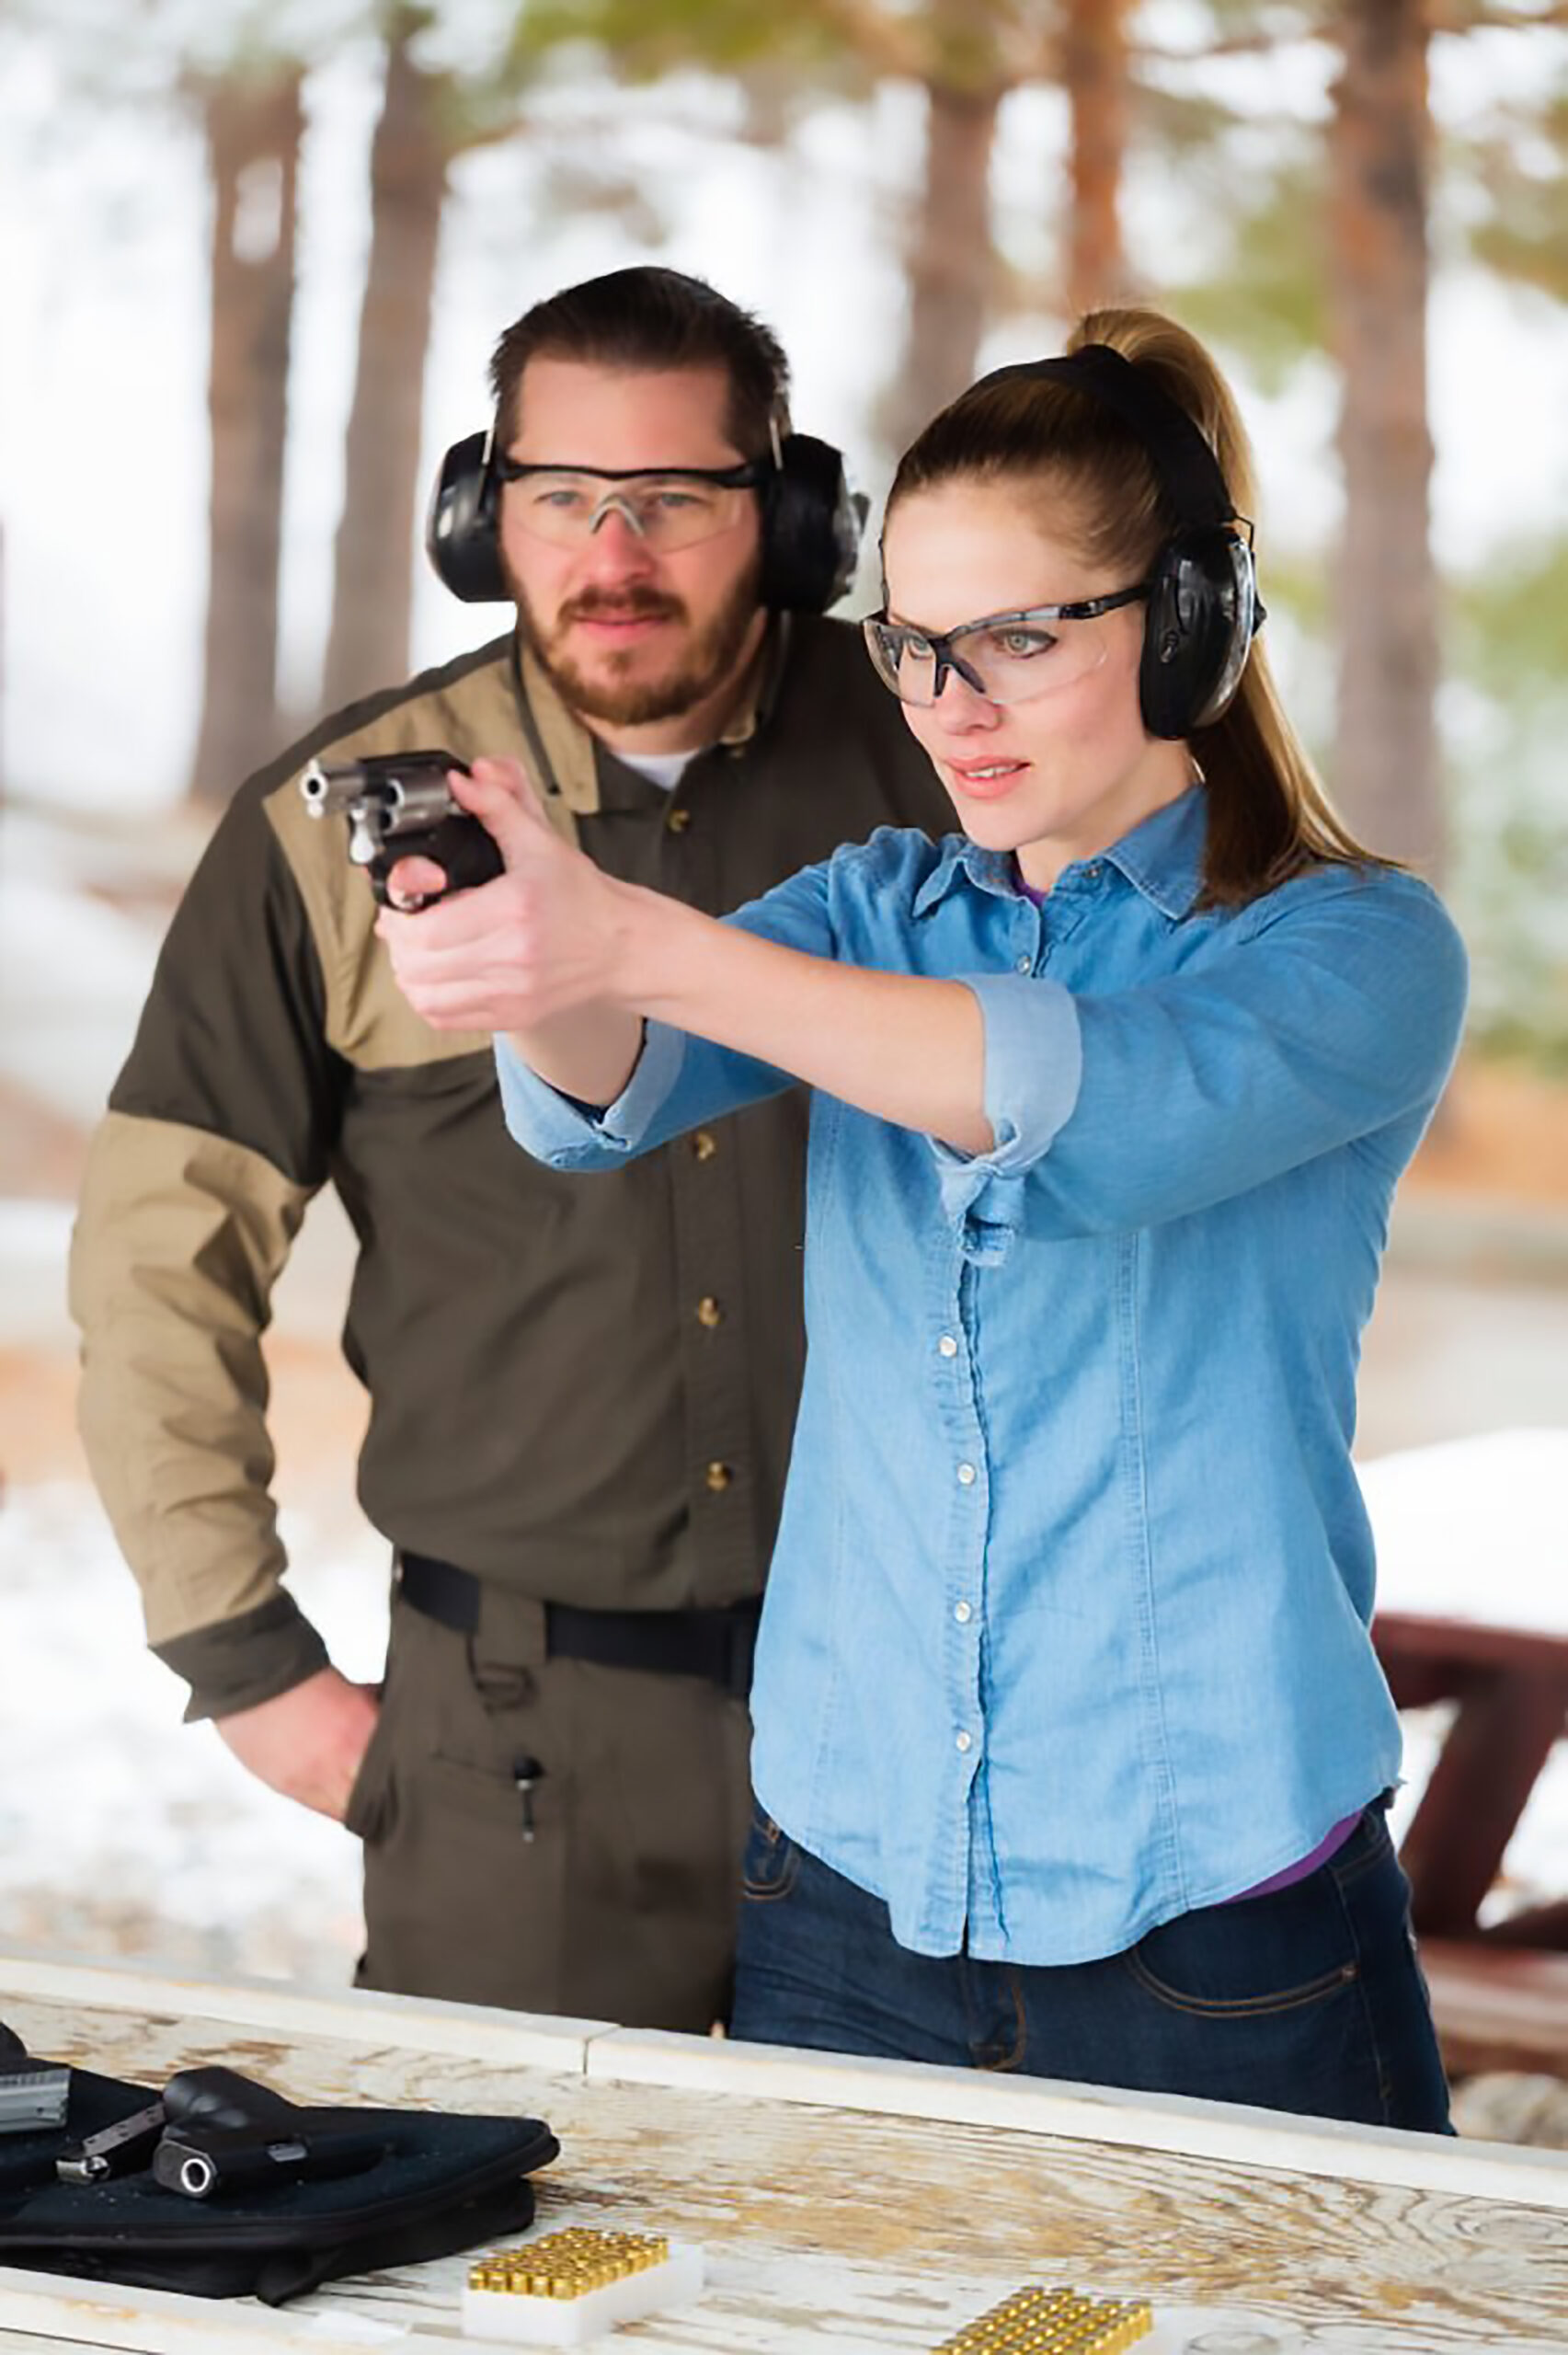 shooting classes Dallas Fort Worth DFW - license to carry class Dallas Fort Worth DFW - handgun training Dallas Fort Worth DFW - handgun classes Dallas Fort Worth DFW - gun safety course Dallas Fort Worth DFW - gun safety class Dallas Fort Worth DFW - gun classes Dallas Fort Worth DFW - gun class Dallas Fort Worth DFW - firearms training Dallas Fort Worth DFW - Dallas Fort Worth DFW handgun training - Dallas Fort Worth DFW firearms training - Dallas Fort Worth DFW concealed carry class - Dallas Fort Worth DFW chl classes - chl classes Dallas Fort Worth DFW - concealed carry classes in Dallas Fort Worth DFW - LTC in Dallas Fort Worth DFW - License to Carry Dallas Fort Worth DFW - Dallas Fort Worth DFW License to Carry - Dallas Fort Worth DFW License to Carry Class - chl class Dallas Fort Worth DFW - Dallas Fort Worth DFW chl class - chl Dallas Fort Worth DFW - chl Dallas Fort Worth DFW classes - chl Dallas Fort Worth DFW Texas - concealed carry class Dallas Fort Worth DFW - concealed carry classes Dallas Fort Worth DFW - concealed carry Dallas Fort Worth DFW - concealed carry permit Dallas Fort Worth DFW - concealed handgun license Dallas Fort Worth DFW tx - concealed handgun license in Dallas Fort Worth DFW Texas - pistol training Dallas Fort Worth DFW - Dallas Fort Worth DFW pistol training - shooting lessons Dallas Fort Worth DFW - Dallas Fort Worth DFW shooting lessons - gun safety classes Dallas Fort Worth DFW - gun training Dallas Fort Worth DFW - Dallas Fort Worth DFW concealed carry - Dallas Fort Worth DFW gun class - Dallas Fort Worth DFW gun license - Dallas Fort Worth DFW gun training - Dallas Fort Worth DFW handgun classes - Dallas Fort Worth DFW shooting classes - concealed carry license Dallas Fort Worth DFW - firearm training Dallas Fort Worth DFW - license to carry classes Dallas Fort Worth DFW - Dallas Fort Worth DFW concealed carry laws - Dallas Fort Worth DFW concealed handgun - chl classes in Dallas Fort Worth DFW – license to carry Texas Dallas Fort Worth DFW - Dallas Fort Worth DFW Texas License to Carry Online Course – Dallas Fort Worth DFW ltc – ltc training in Dallas Fort Worth DFW – Dallas Fort Worth DFW ltc training – ltc in Dallas Fort Worth DFW Texas – Dallas Fort Worth DFW Texas ltc – ltc training in Dallas Fort Worth DFW Texas – Dallas Fort Worth DFW Texas ltc training